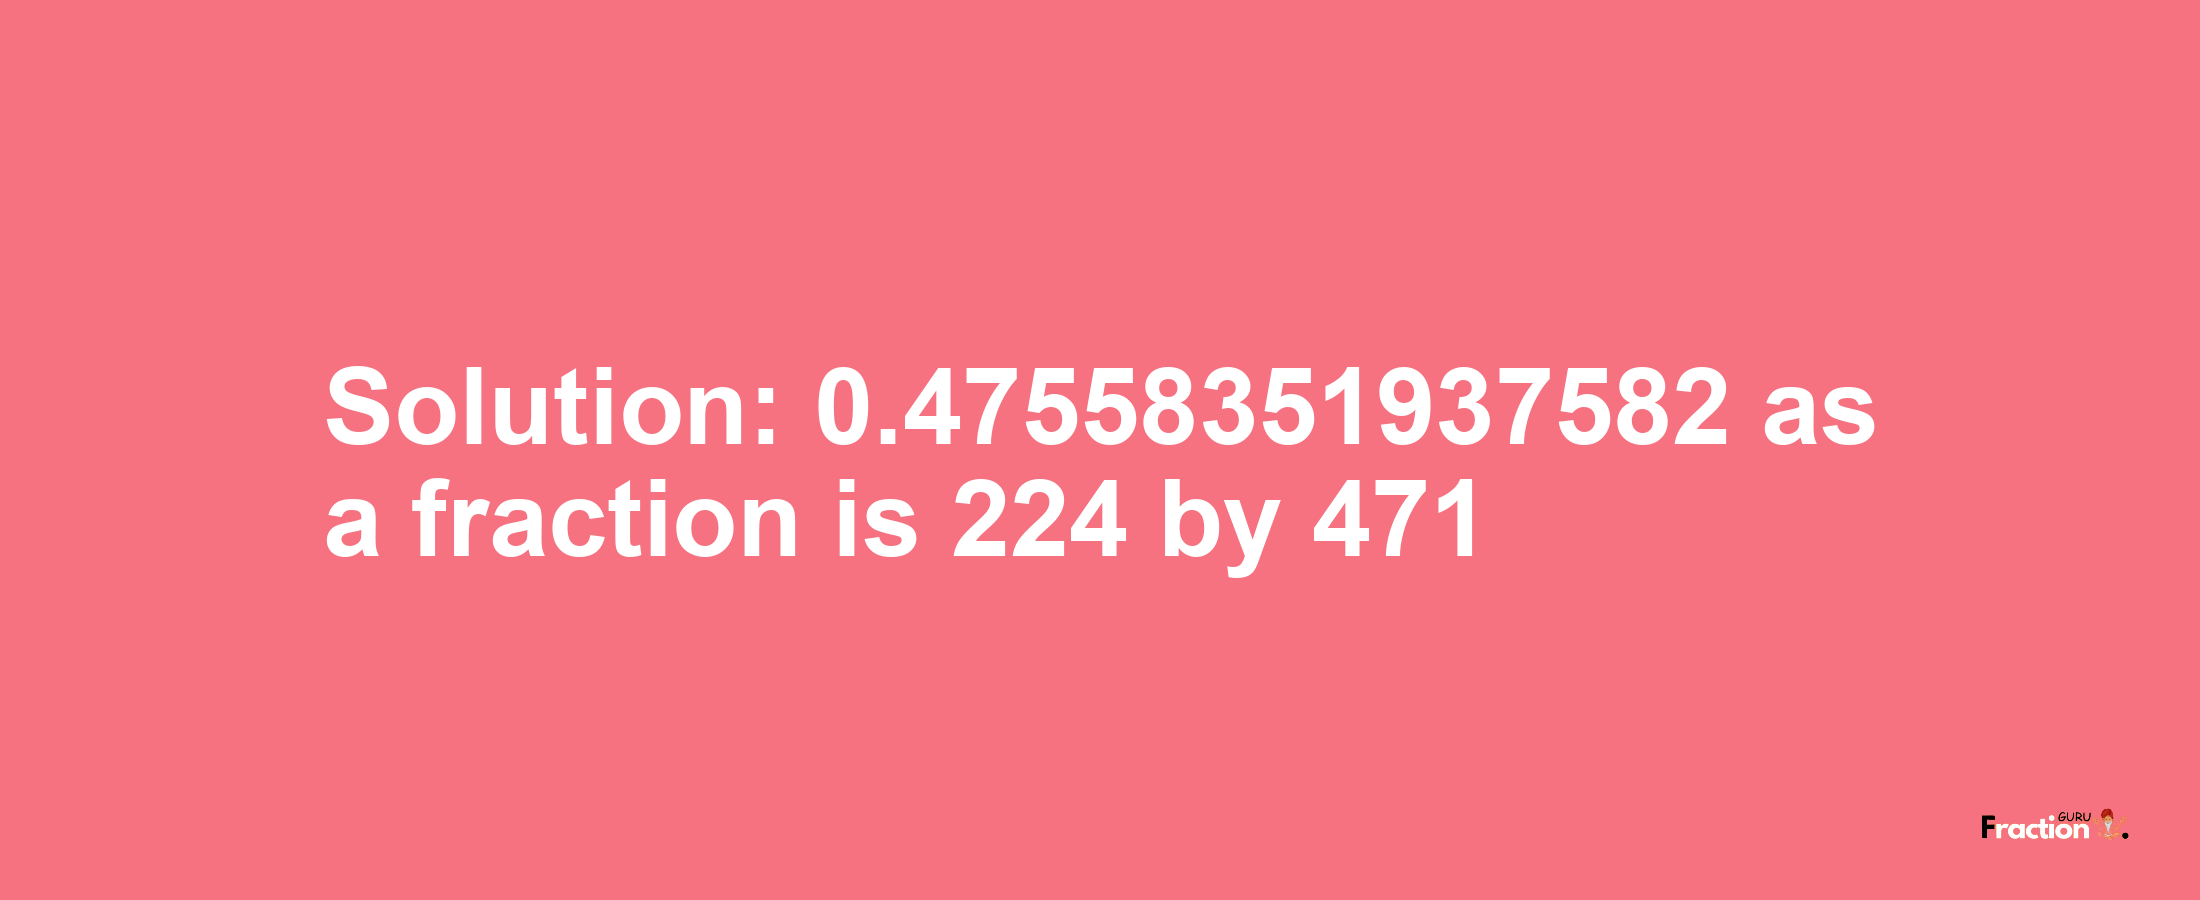 Solution:0.47558351937582 as a fraction is 224/471